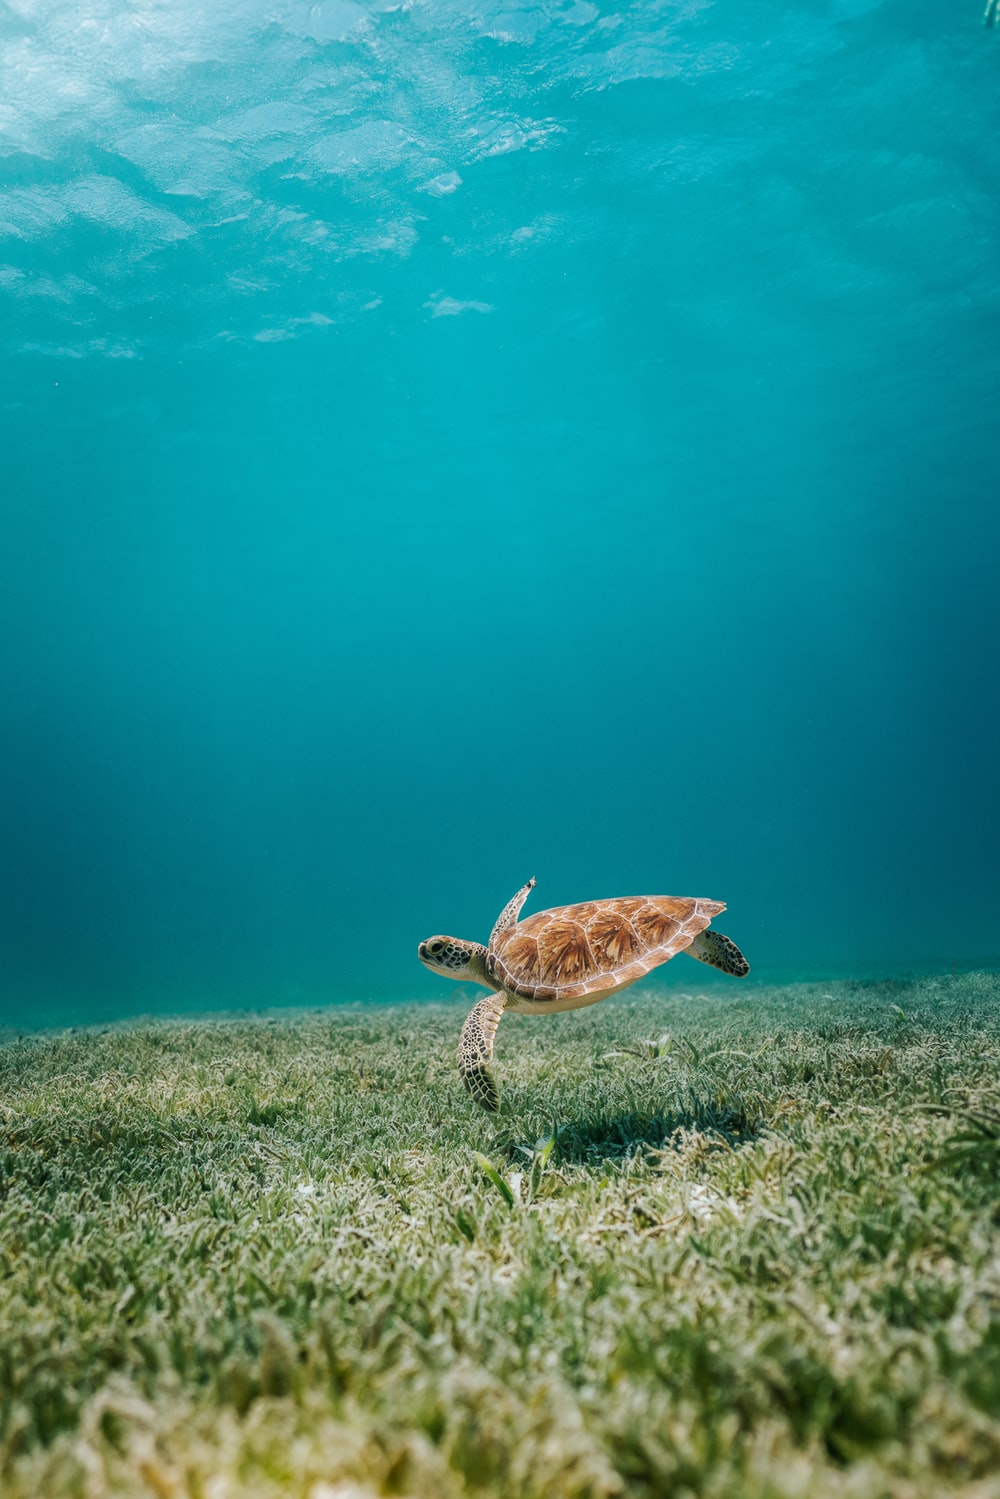 Turtle Picture. Download Free Image